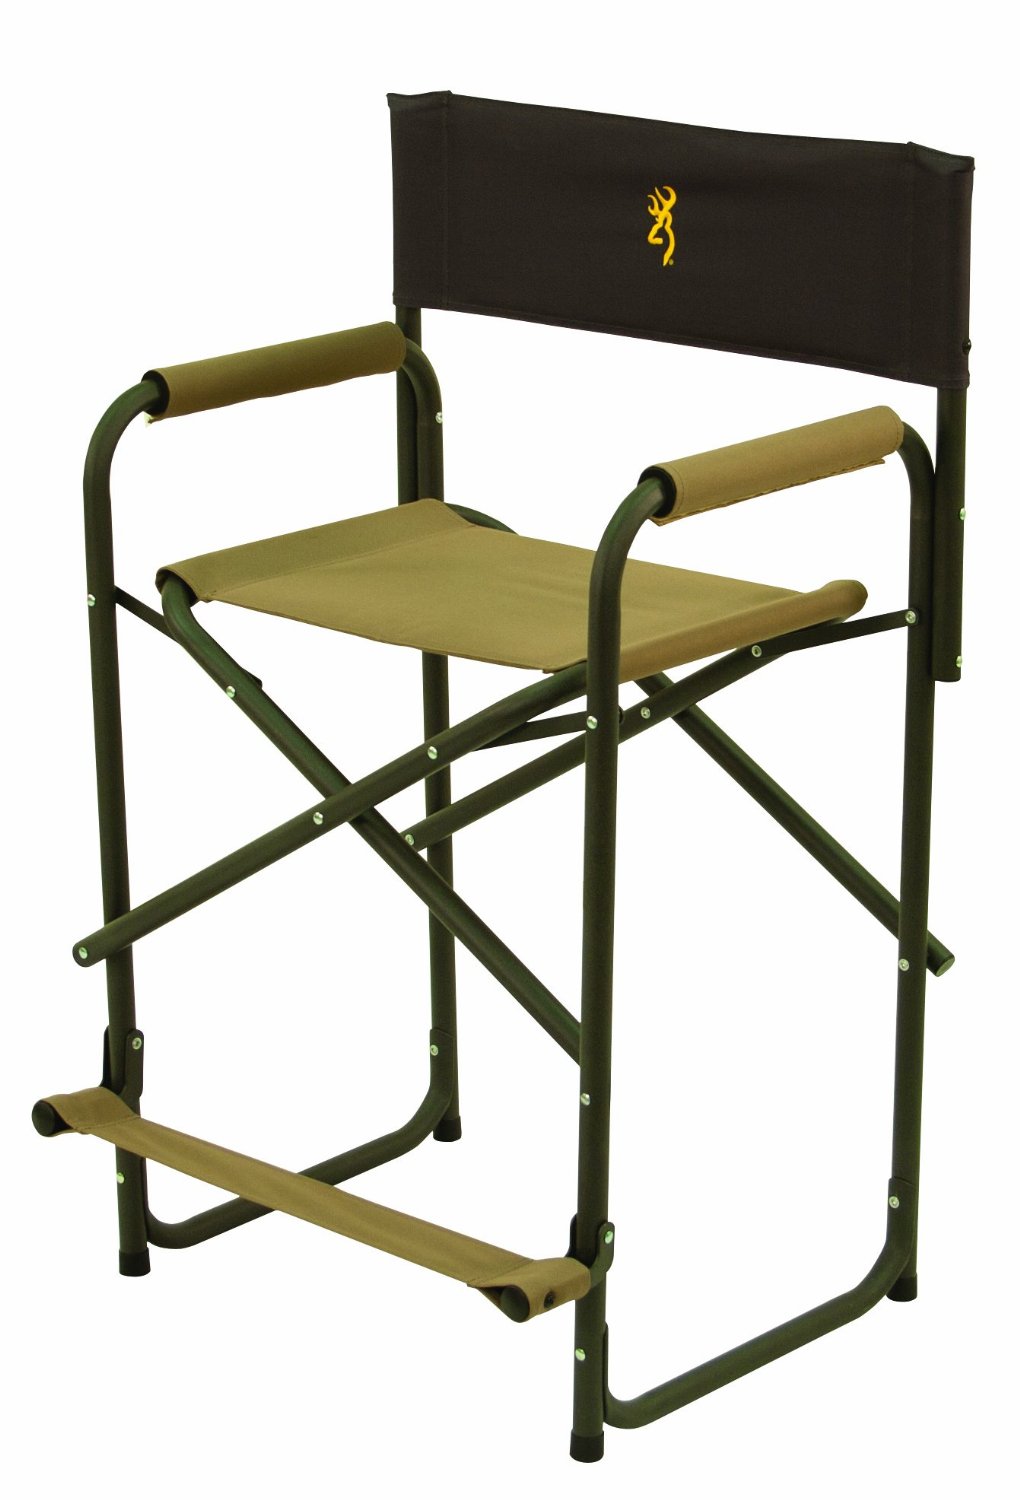 5 Best Camping Directors Chair - Sit comfortably anywhere - Tool Box